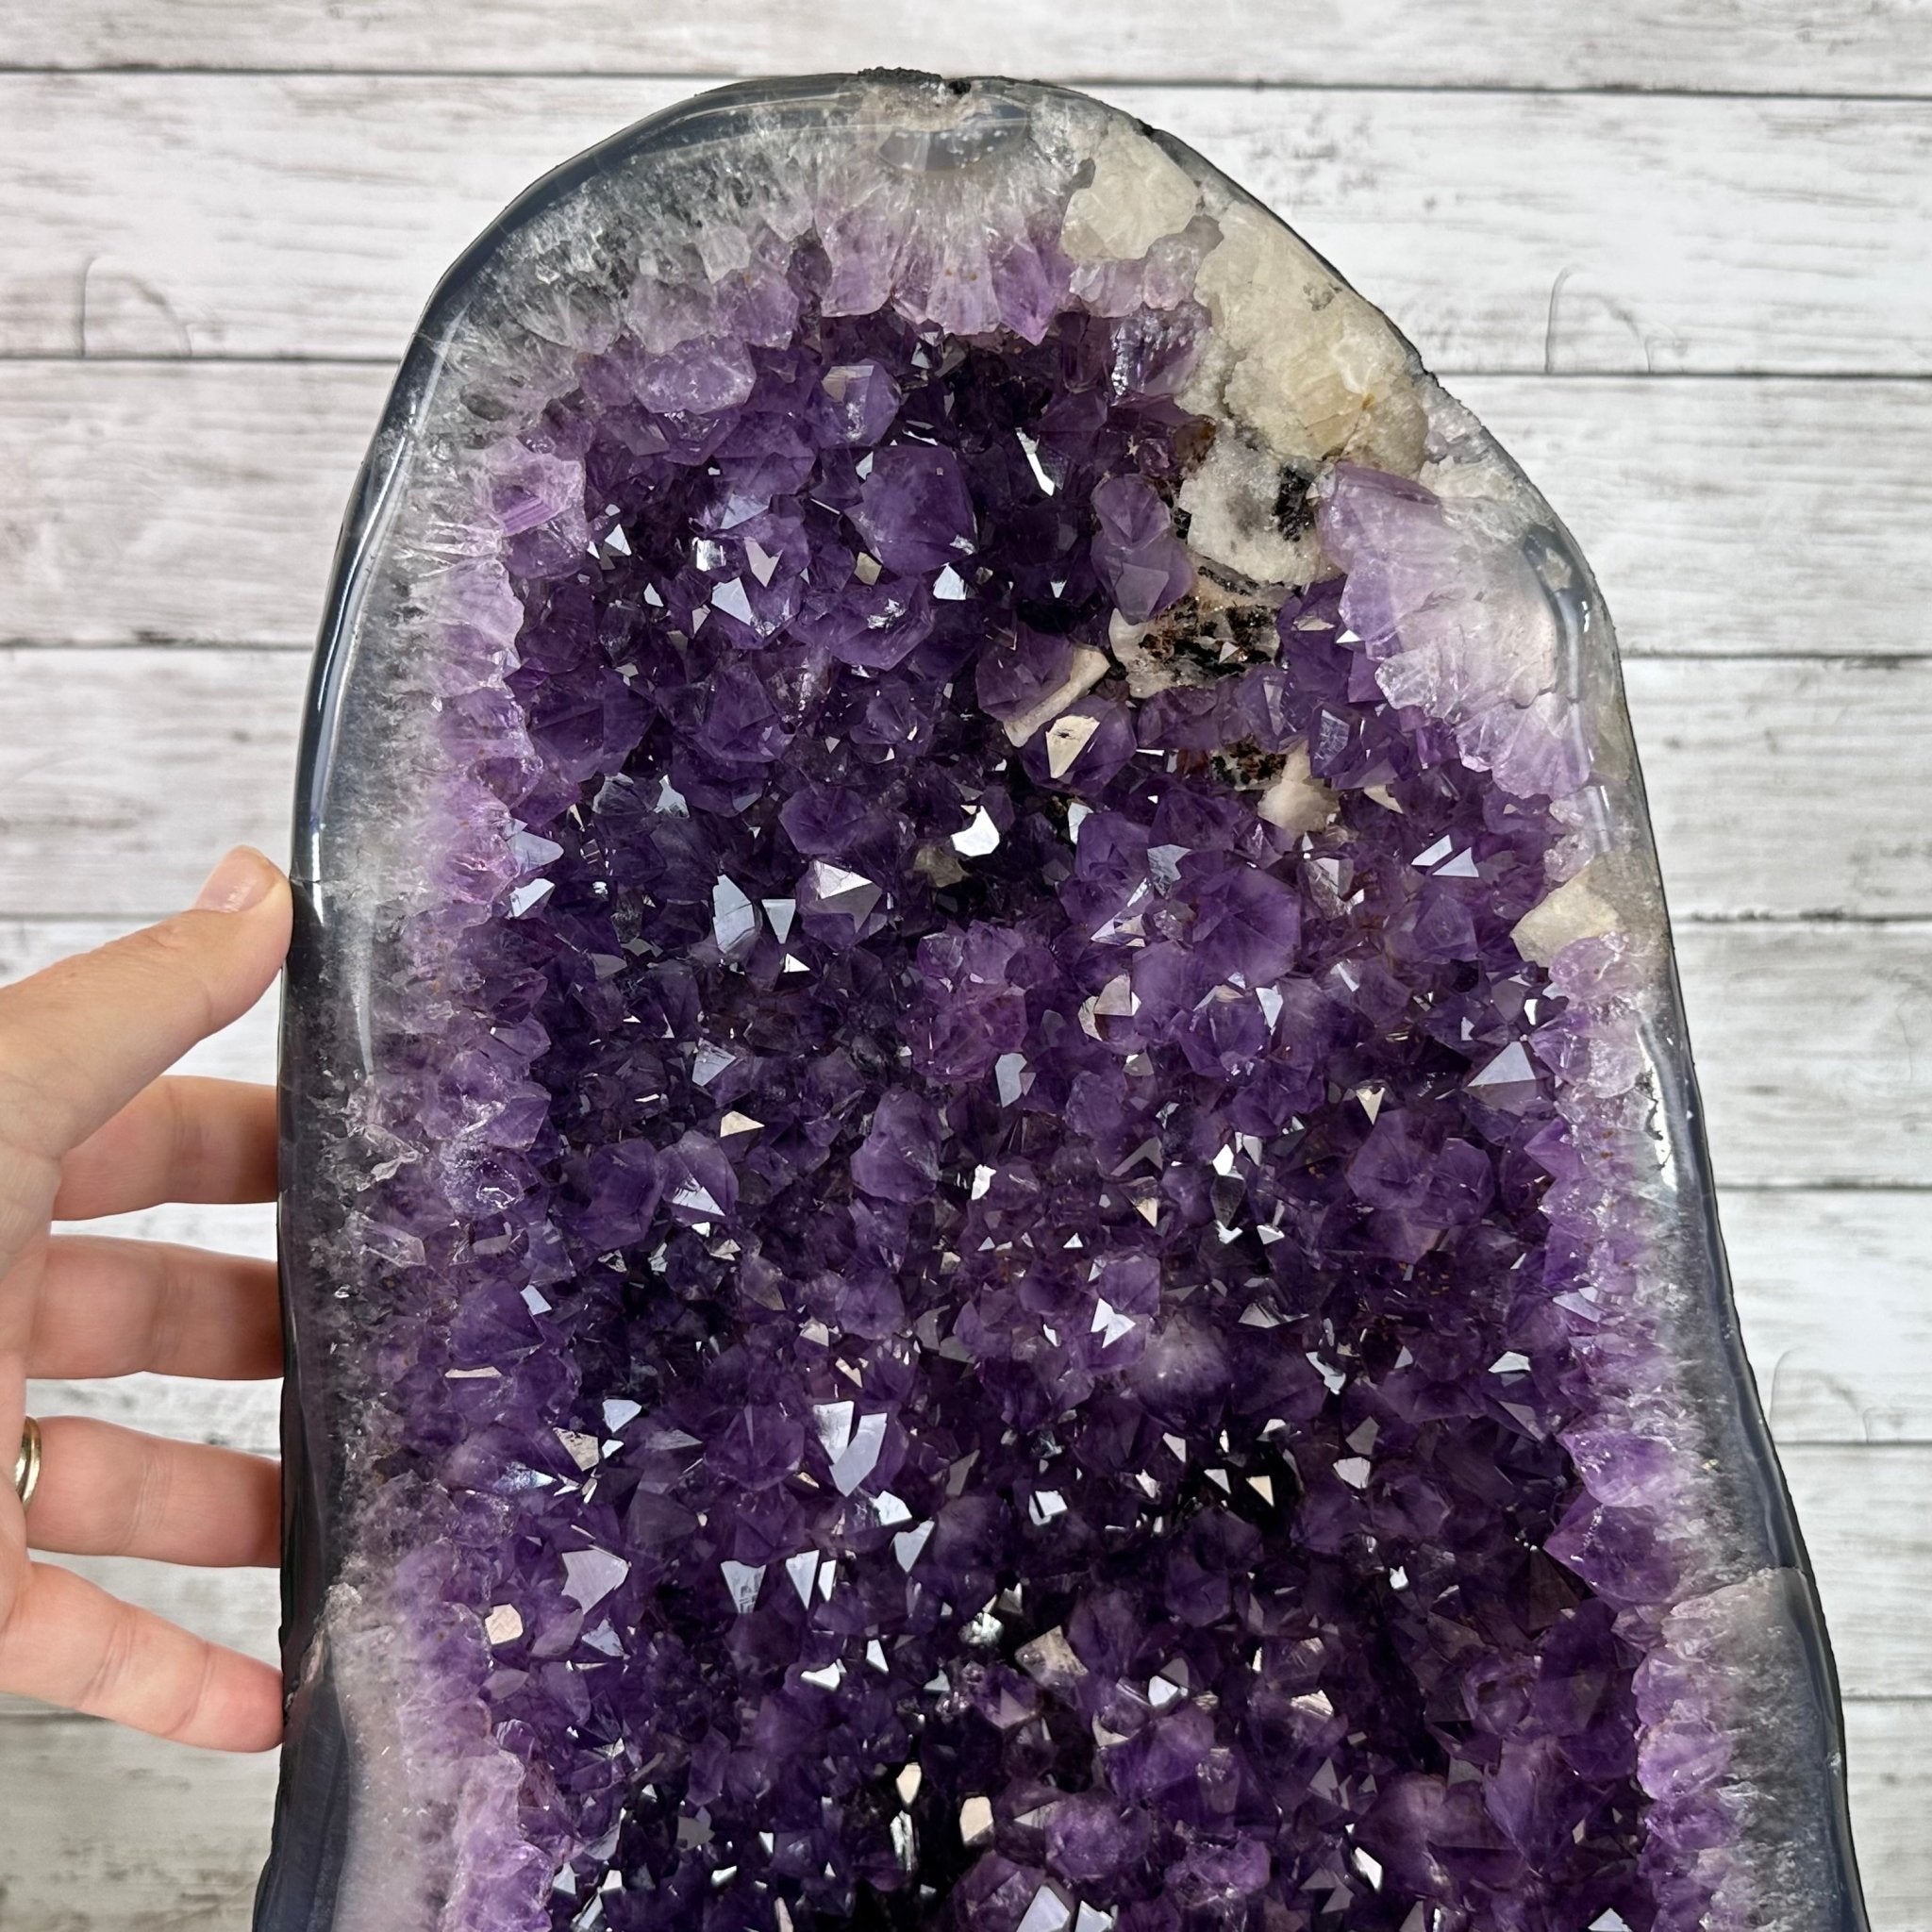 Extra Plus Quality Brazilian Amethyst Cathedral, 77.2 lbs & 24.2" Tall, Model #5601-0992 by Brazil Gems - Brazil GemsBrazil GemsExtra Plus Quality Brazilian Amethyst Cathedral, 77.2 lbs & 24.2" Tall, Model #5601-0992 by Brazil GemsCathedrals5601-0992